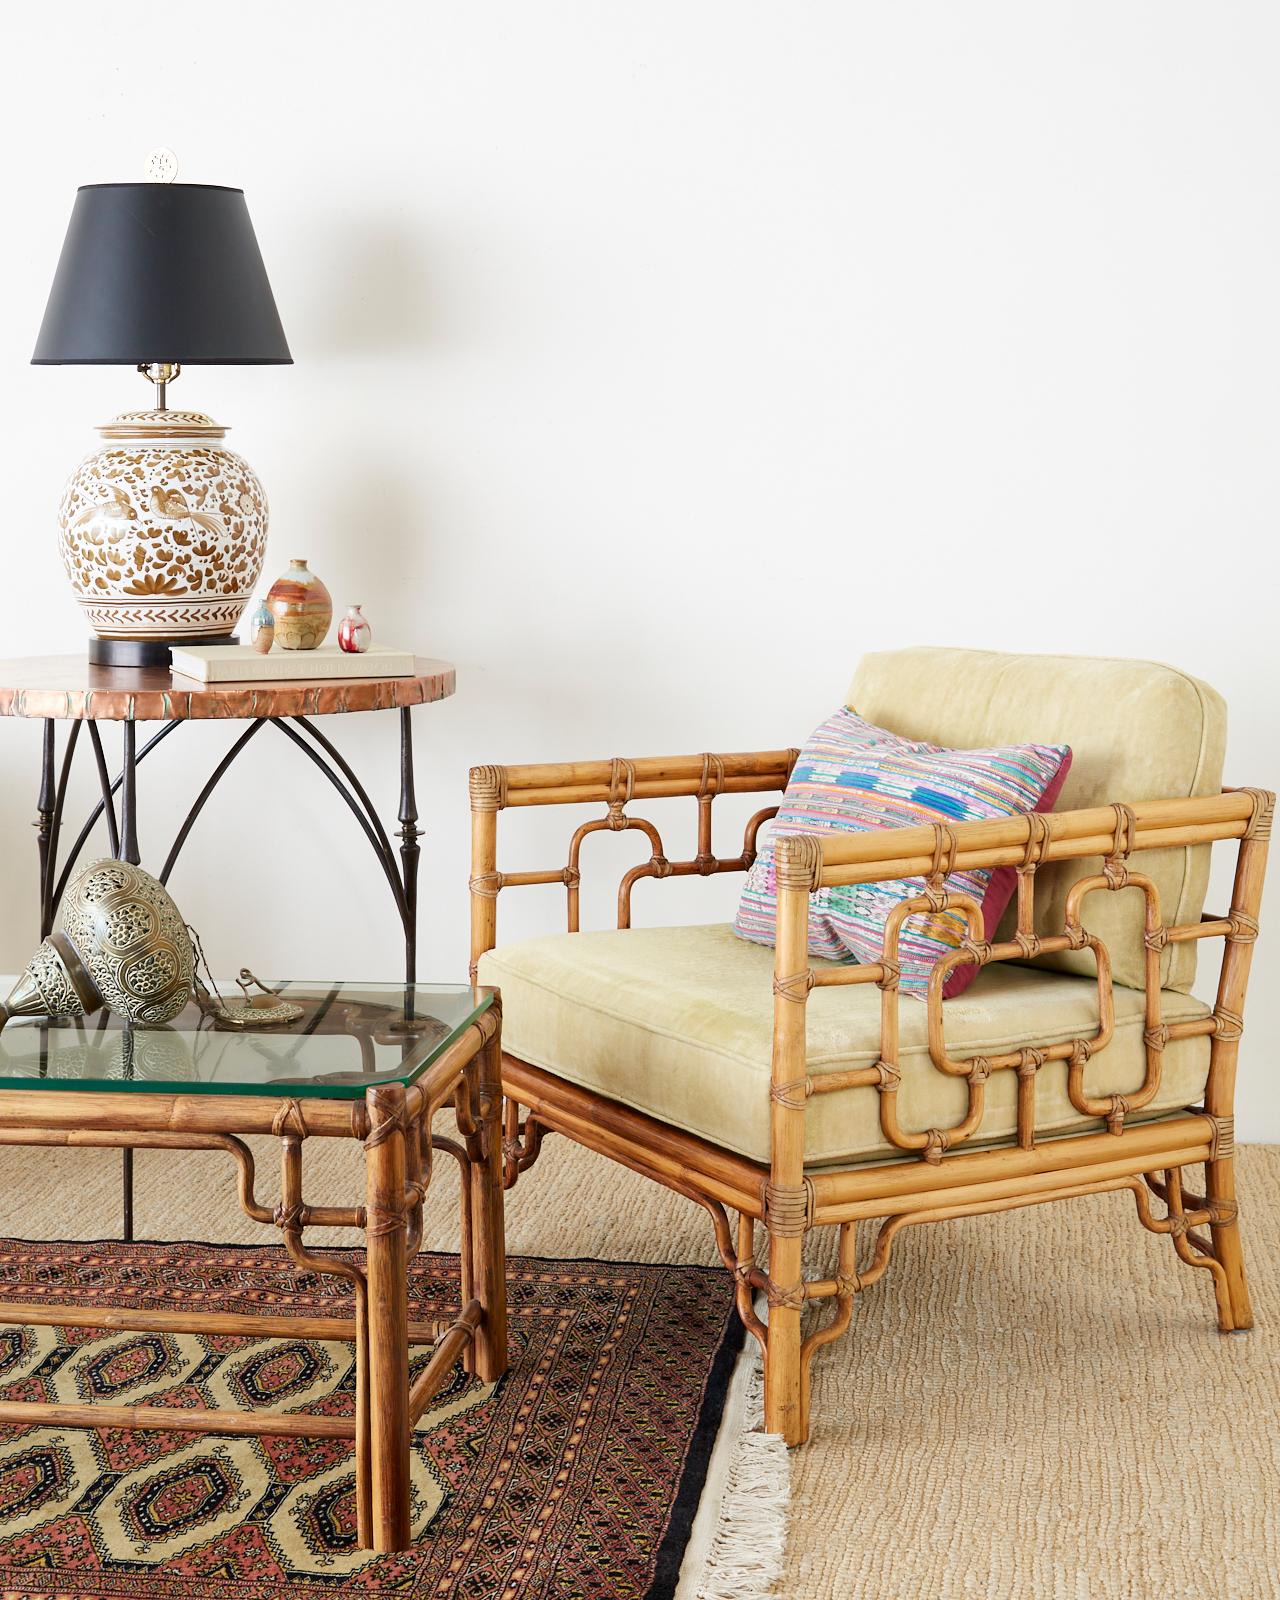 Asian inspired pair of bamboo rattan cube form lounge or club chairs made by McGuire. Created in the California organic modern taste featuring a decorative open fretwork design on the frame known as Marview chairs designed by Elinor McGuire. The